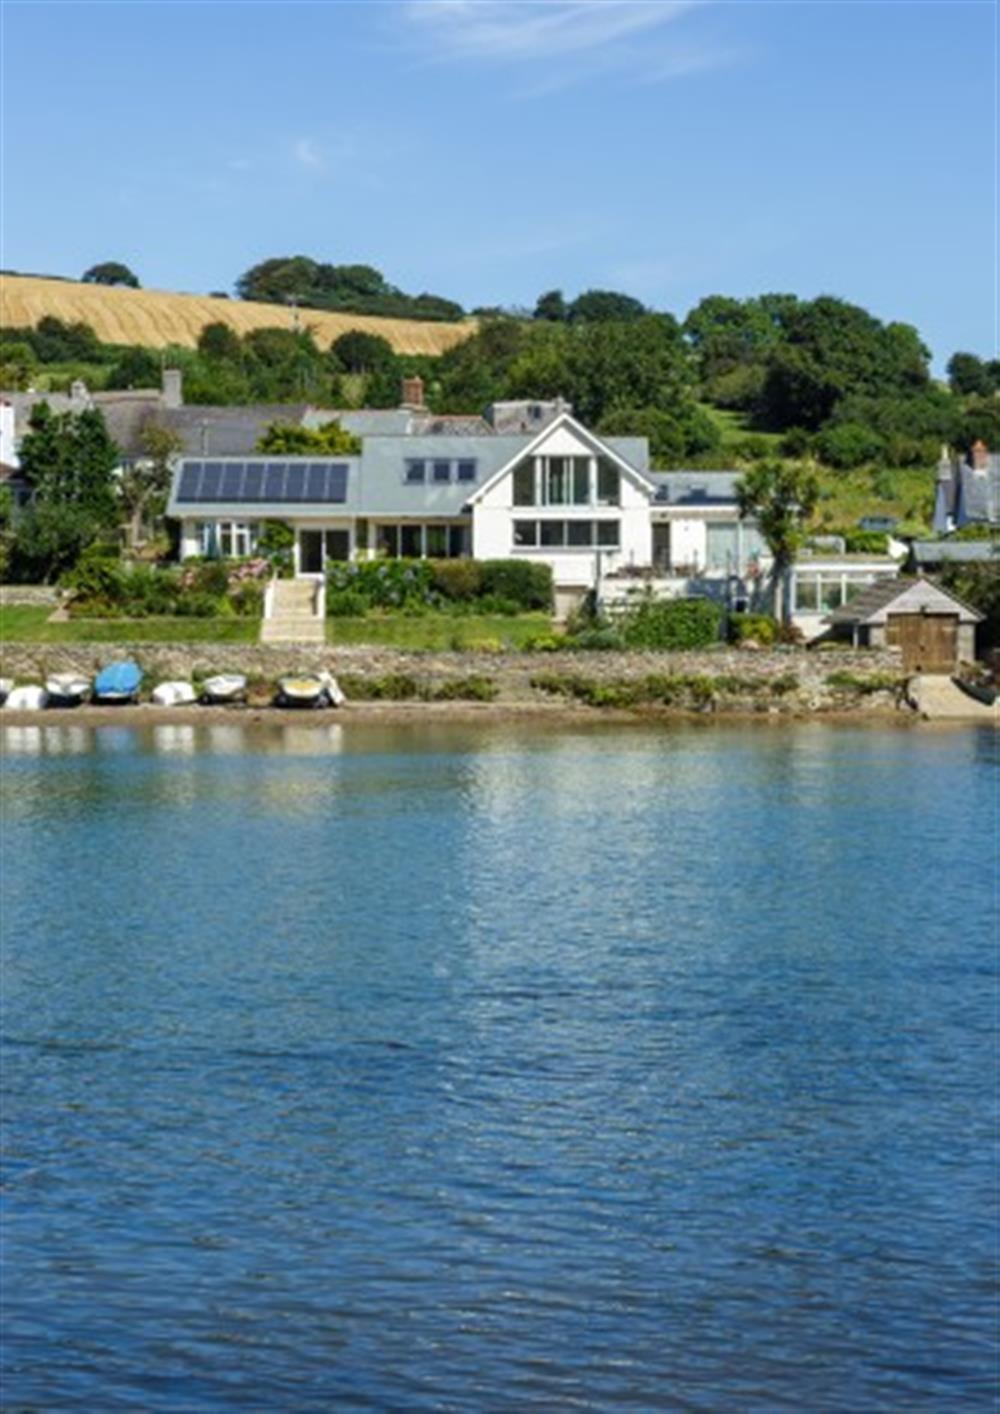 Dog friendly, water front, EV charging and sleeping 16! what a place to enjoy your holiday!